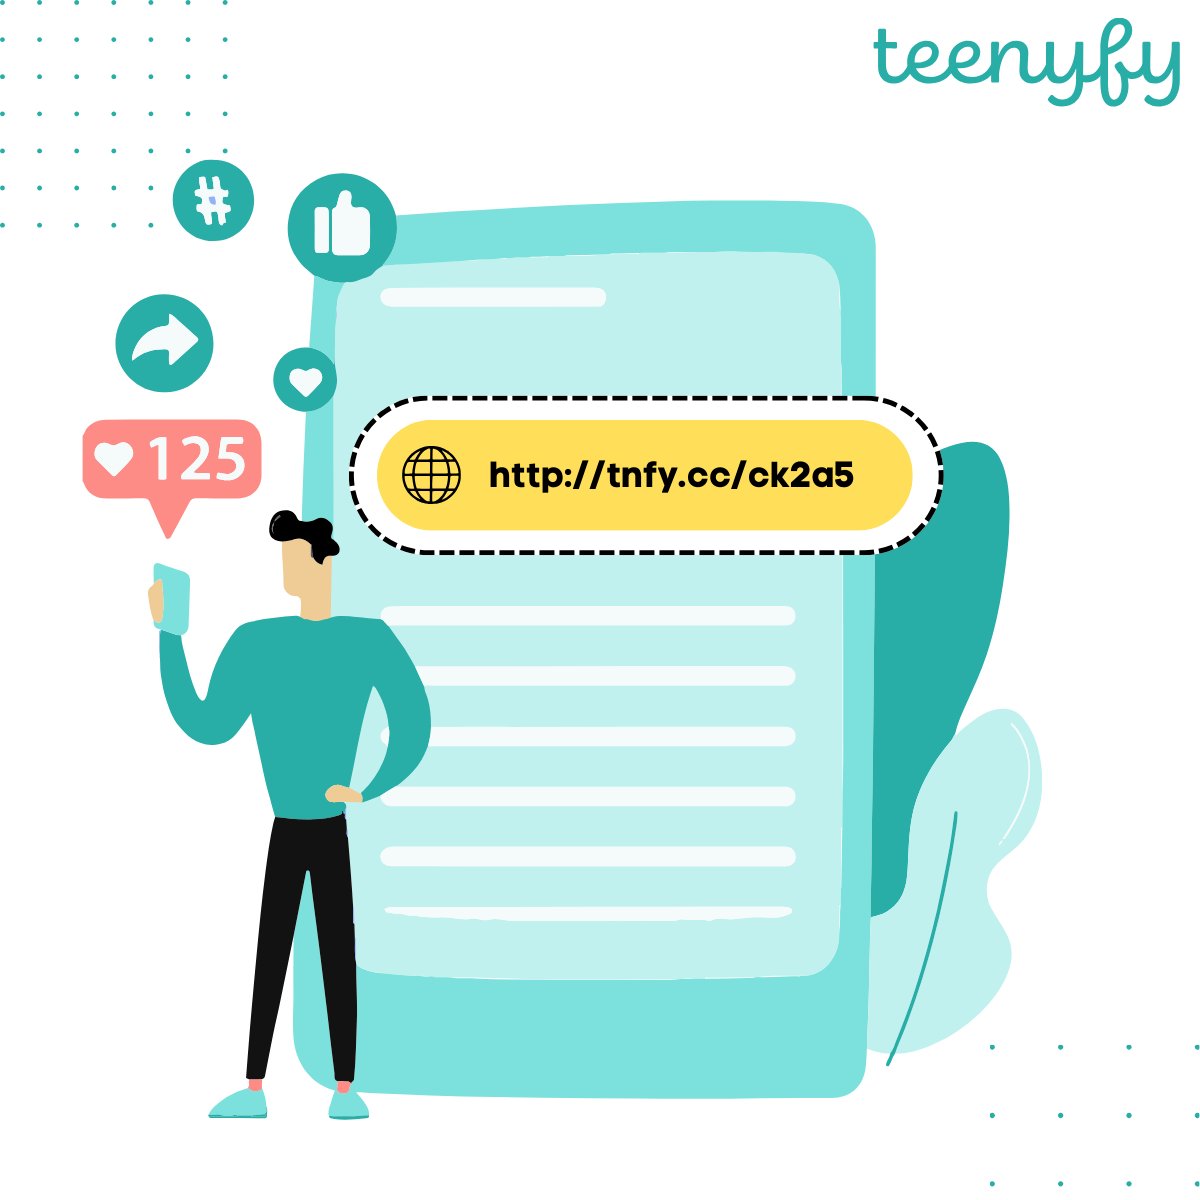 Share more, type less with our social media link shortener. #Register now to start for free - tnfy.pw/lnsignup #fastredirects #urlshortener #smsmarketing #linkshortener #worktips #remotework #urlshorteneronline #besturlshortener #marketing #marketingautomation